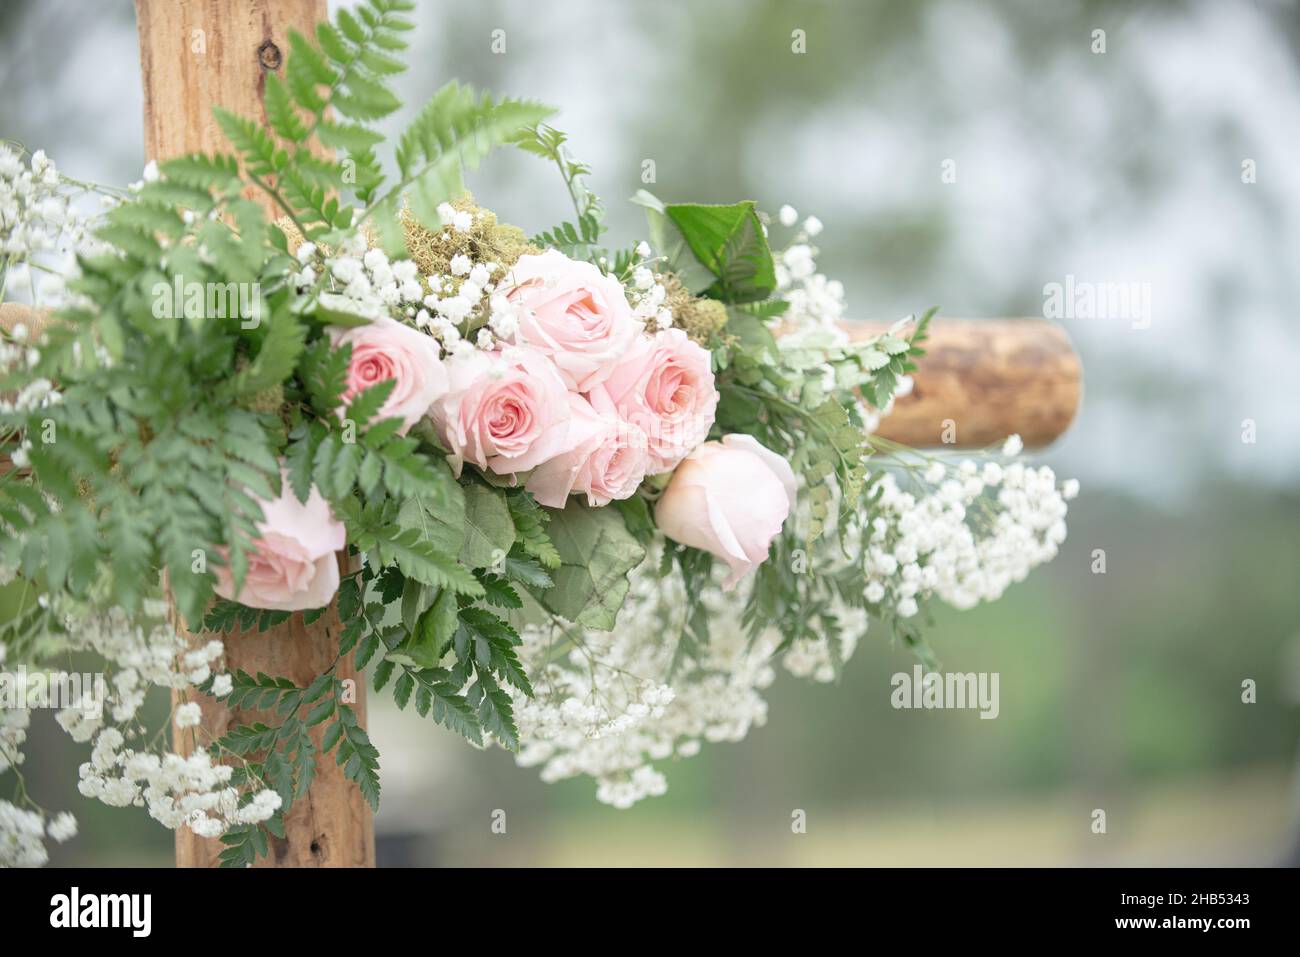 Wooden cross wedding altar with pink roses for outdoor wedding ceremony Stock Photo